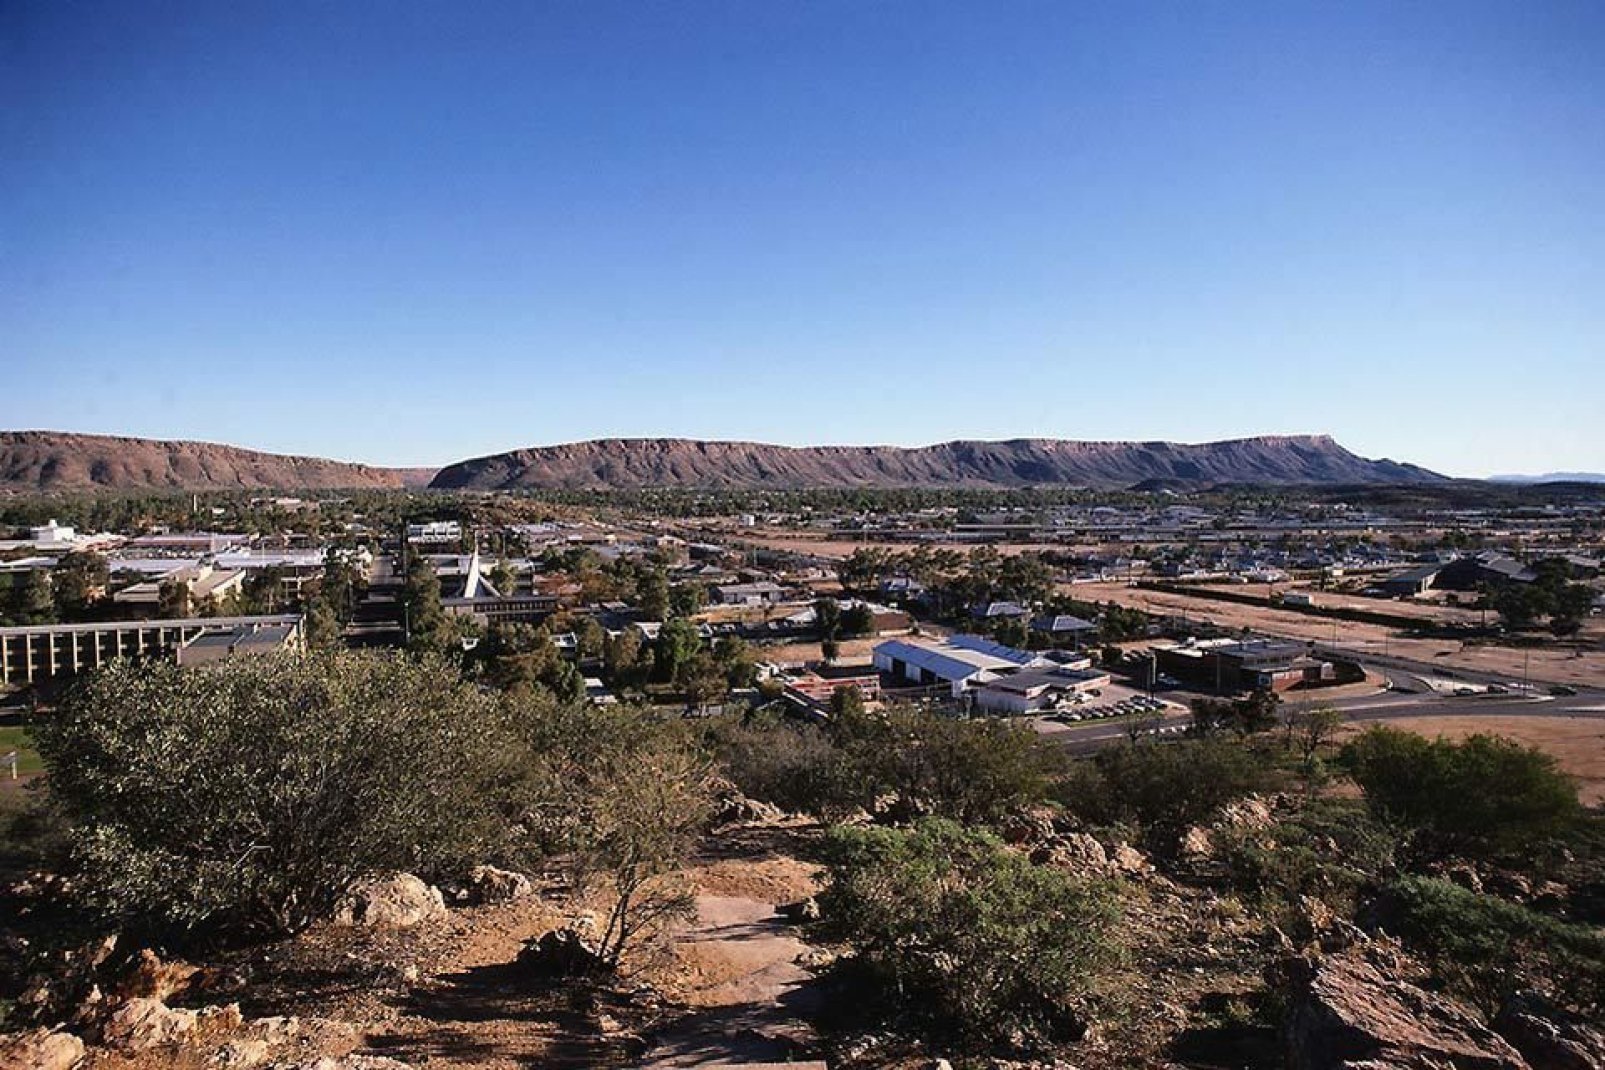 Located in the Northern Territory of Australia, Alice Springs is an urban oasis in the middle of the outback.